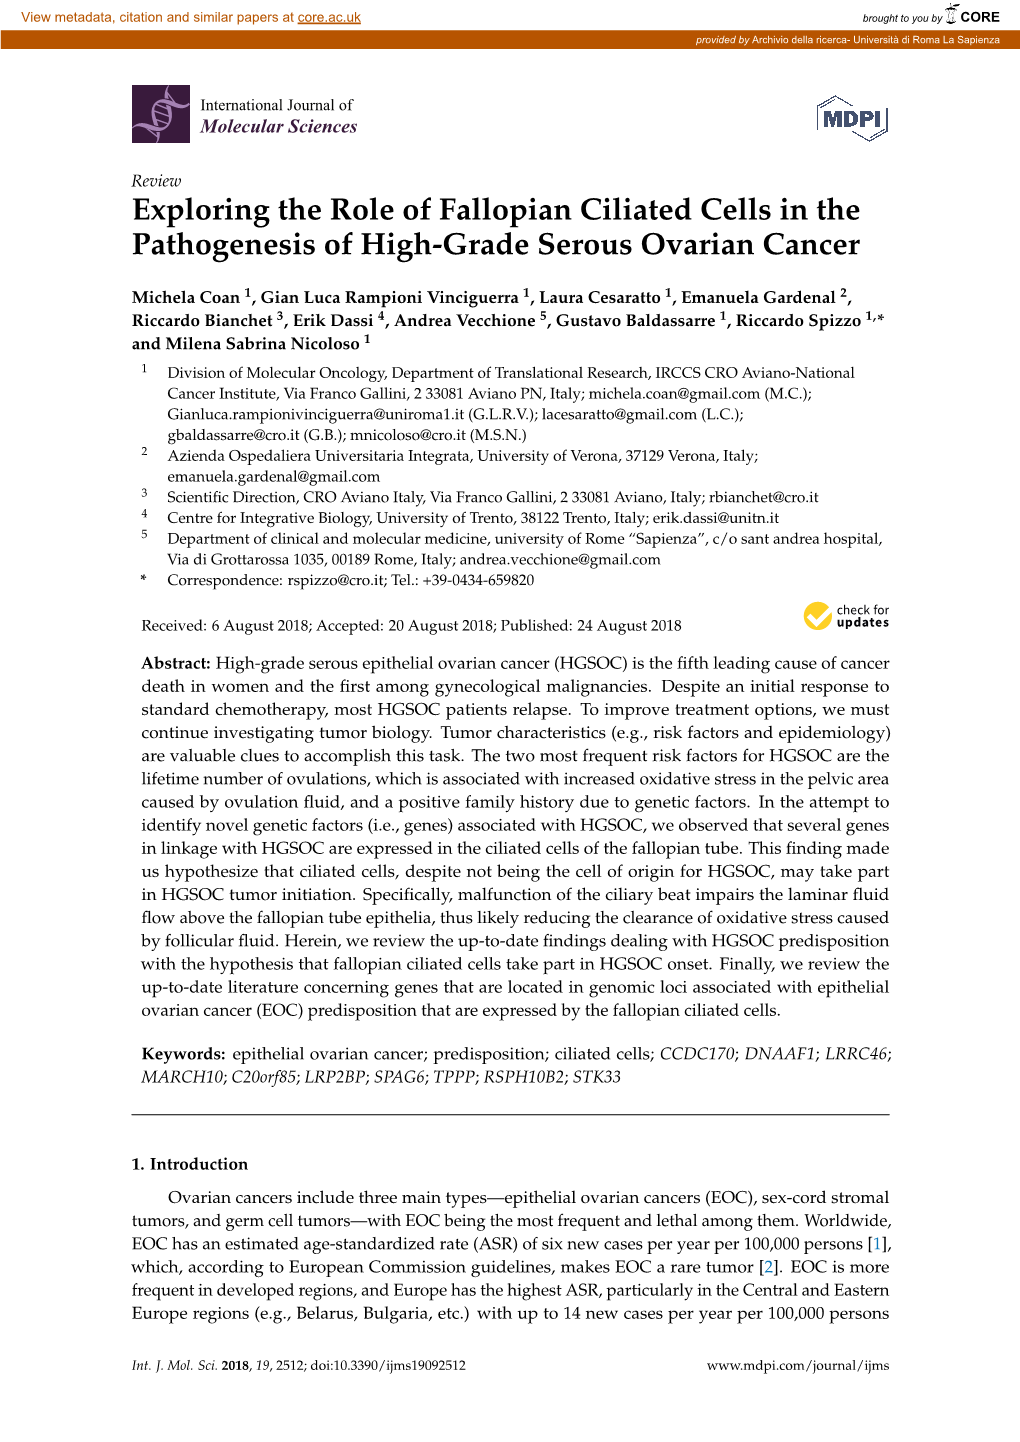 Exploring the Role of Fallopian Ciliated Cells in the Pathogenesis of High-Grade Serous Ovarian Cancer